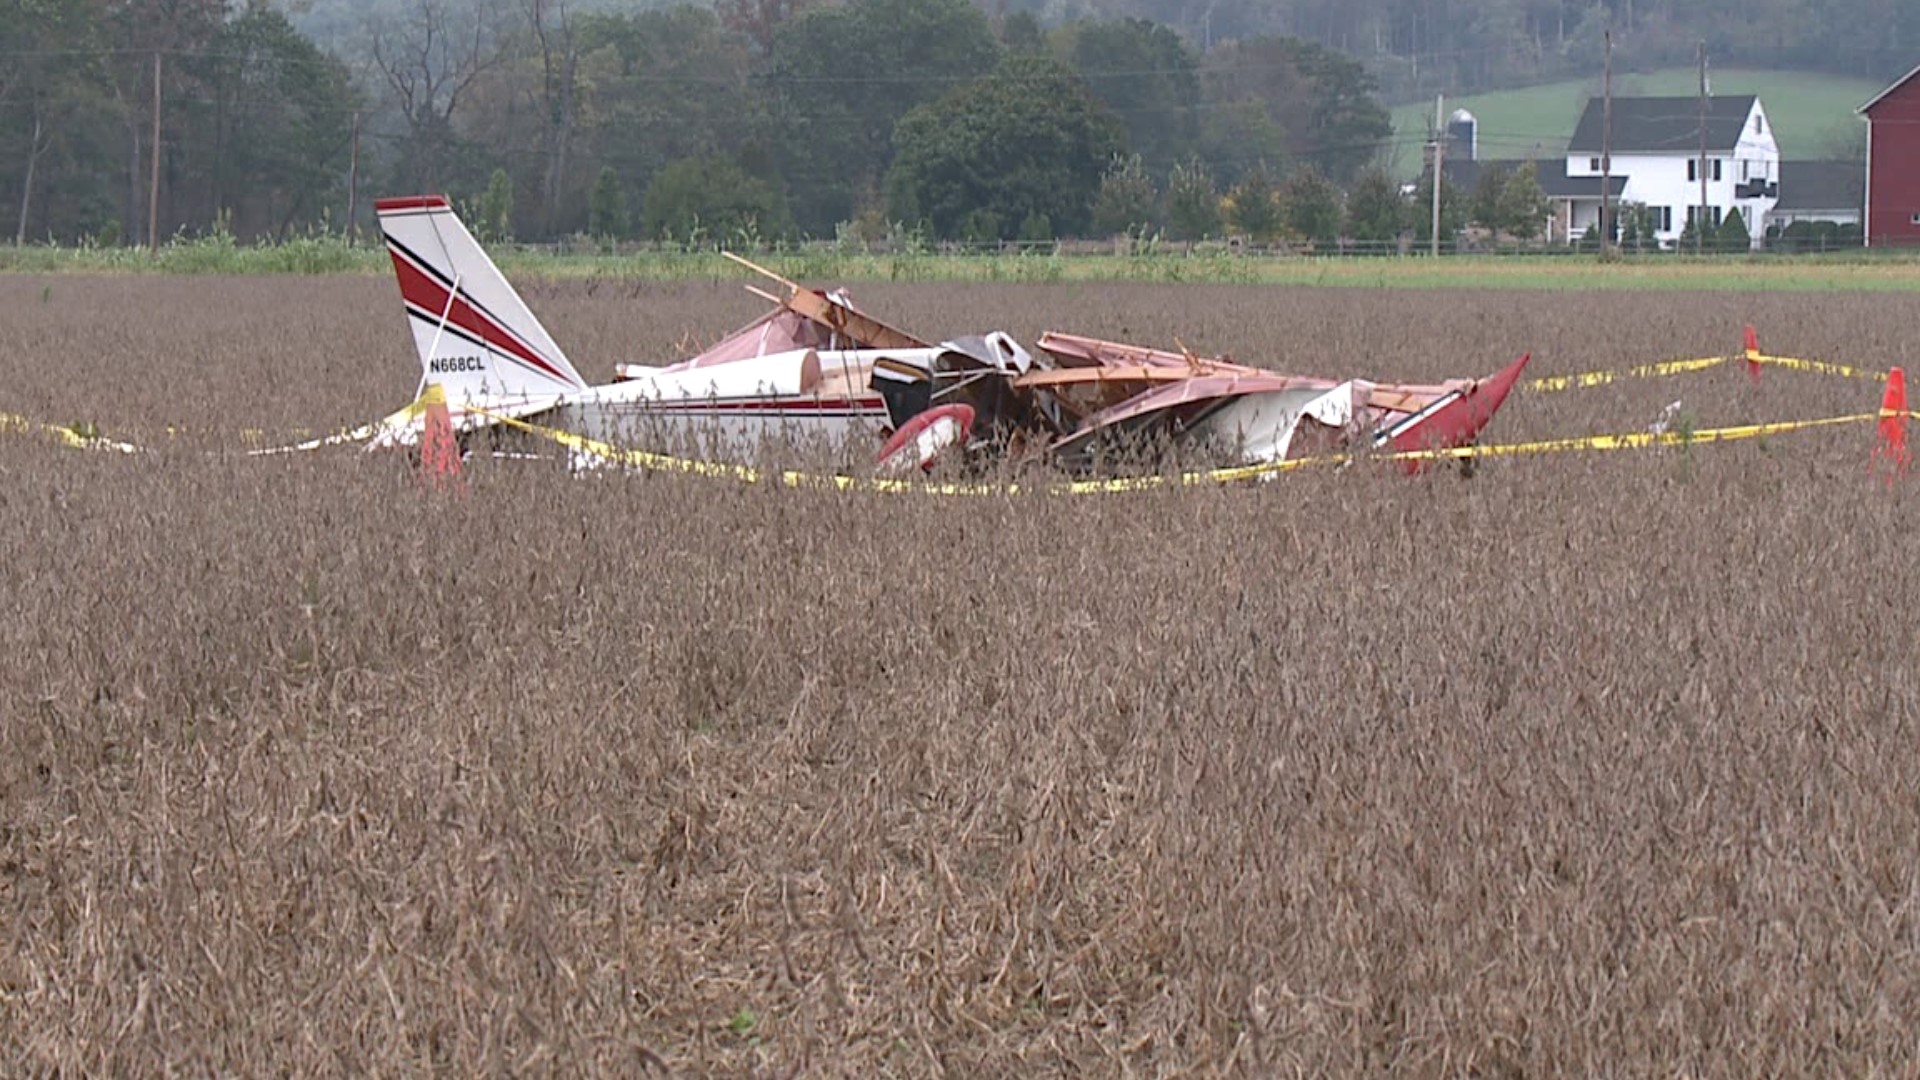 The airport president says a pilot was injured but expected to be okay.